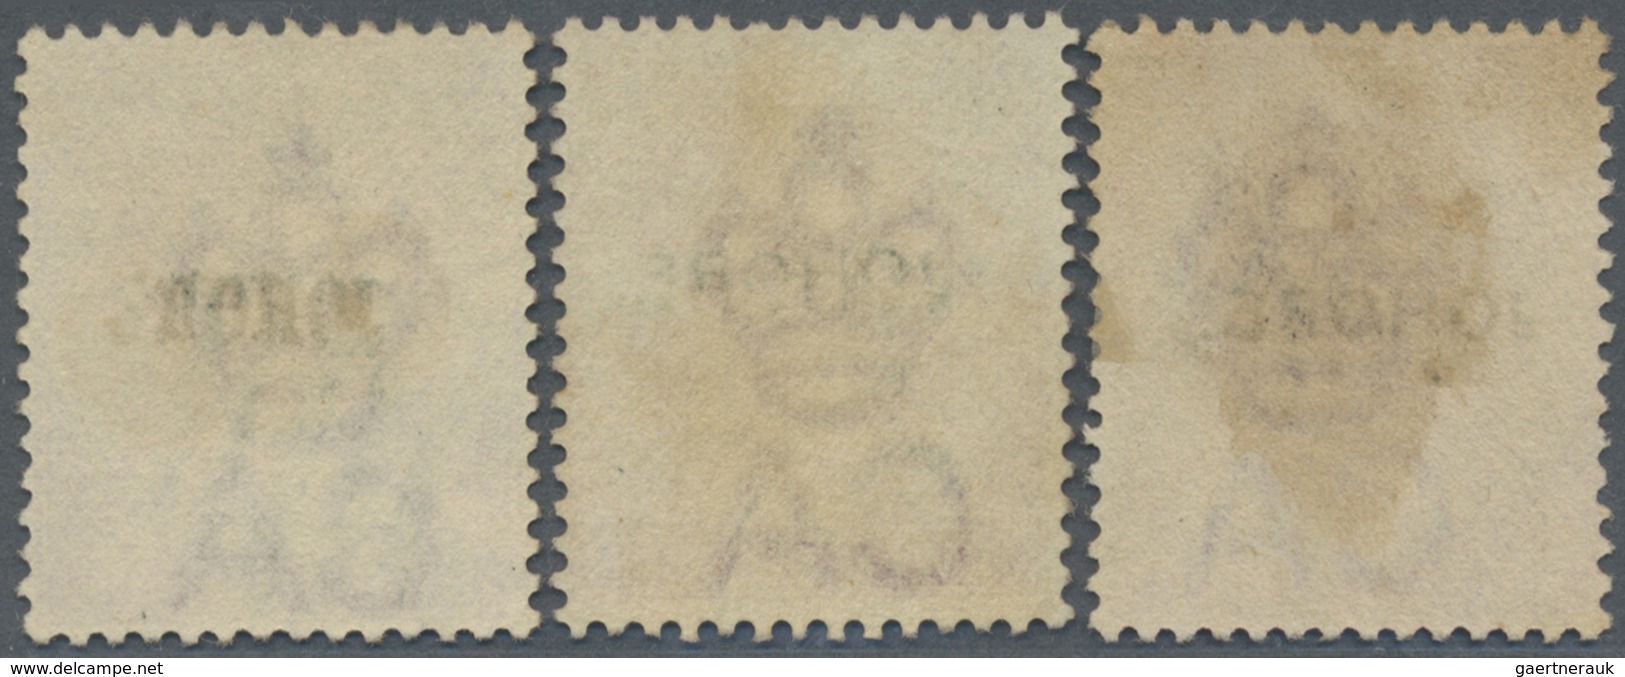 O Malaiische Staaten - Johor: 1885/1886, Straits Settlements QV 2c. Pale Rose With Opt. 'JOHORE' In Ty - Johore